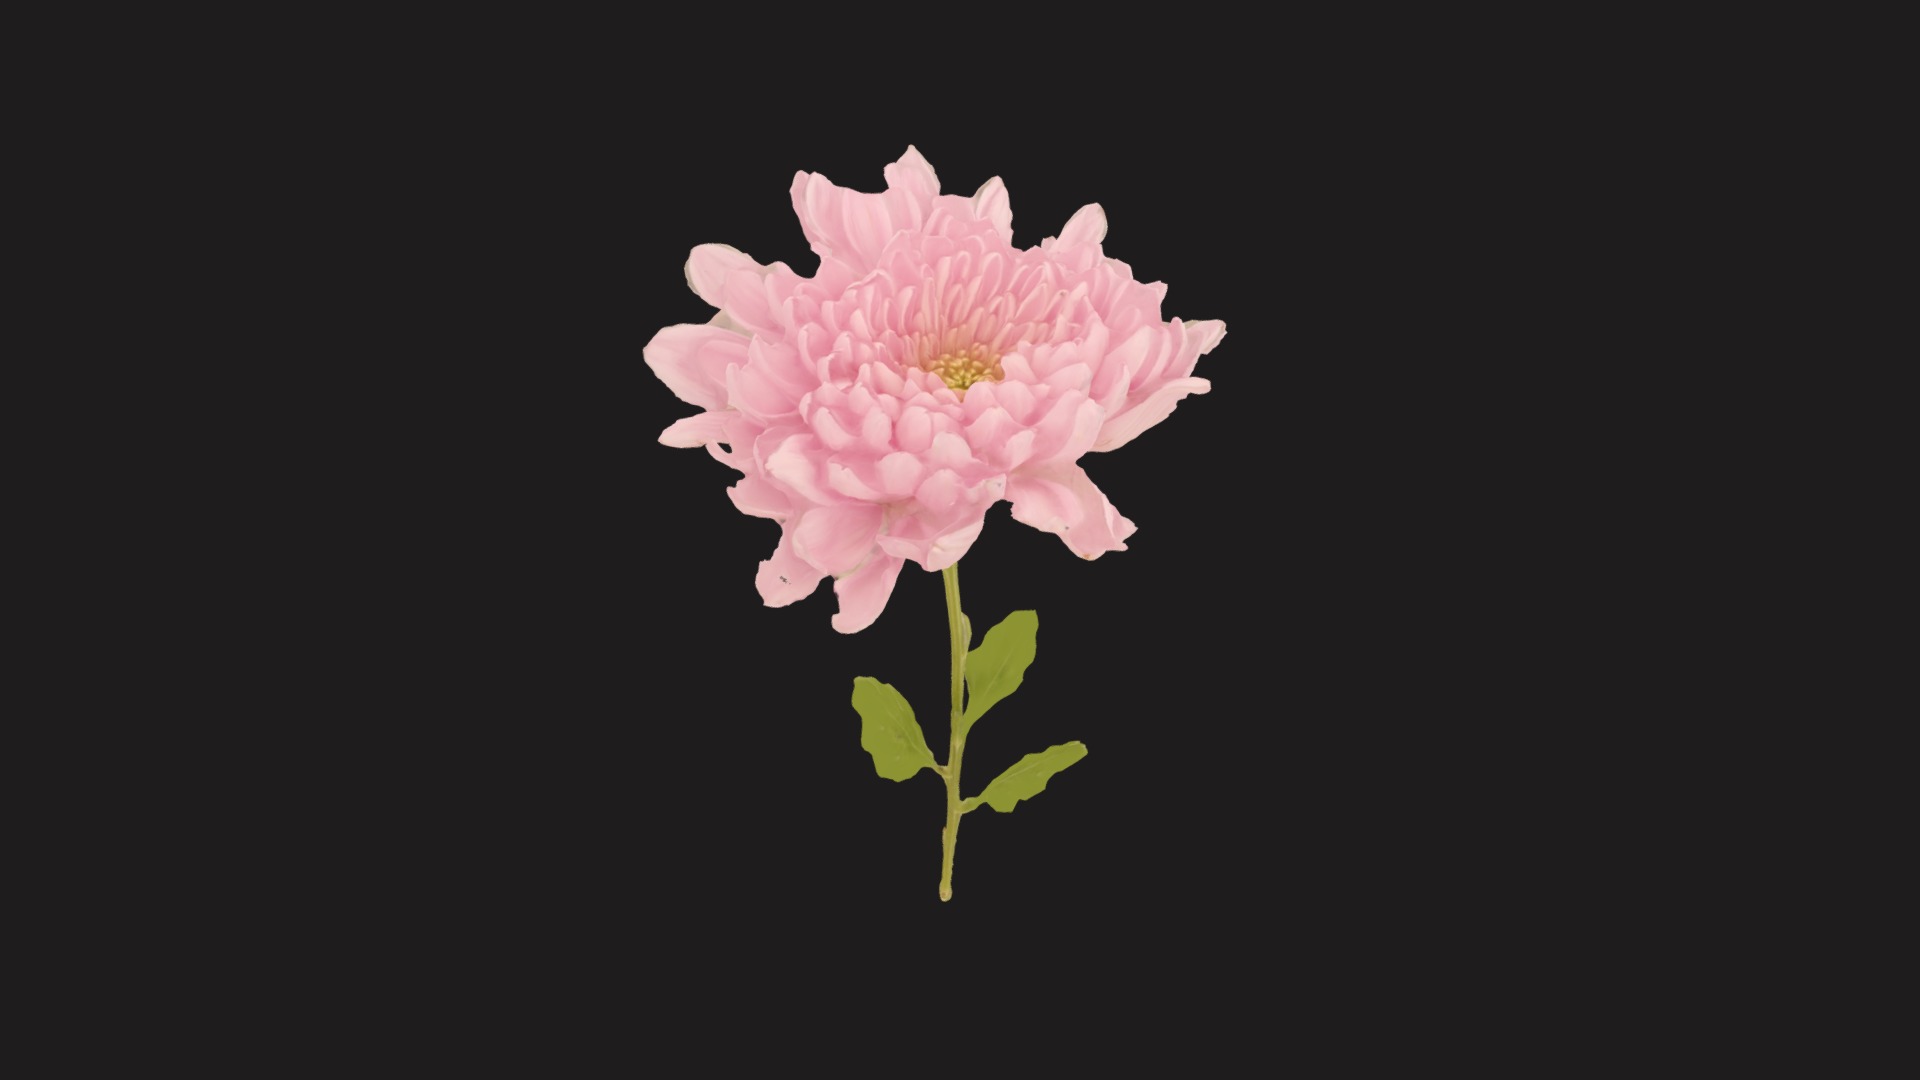 3D model Fw30 – Pink Flower - This is a 3D model of the Fw30 - Pink Flower. The 3D model is about a pink flower with green leaves.